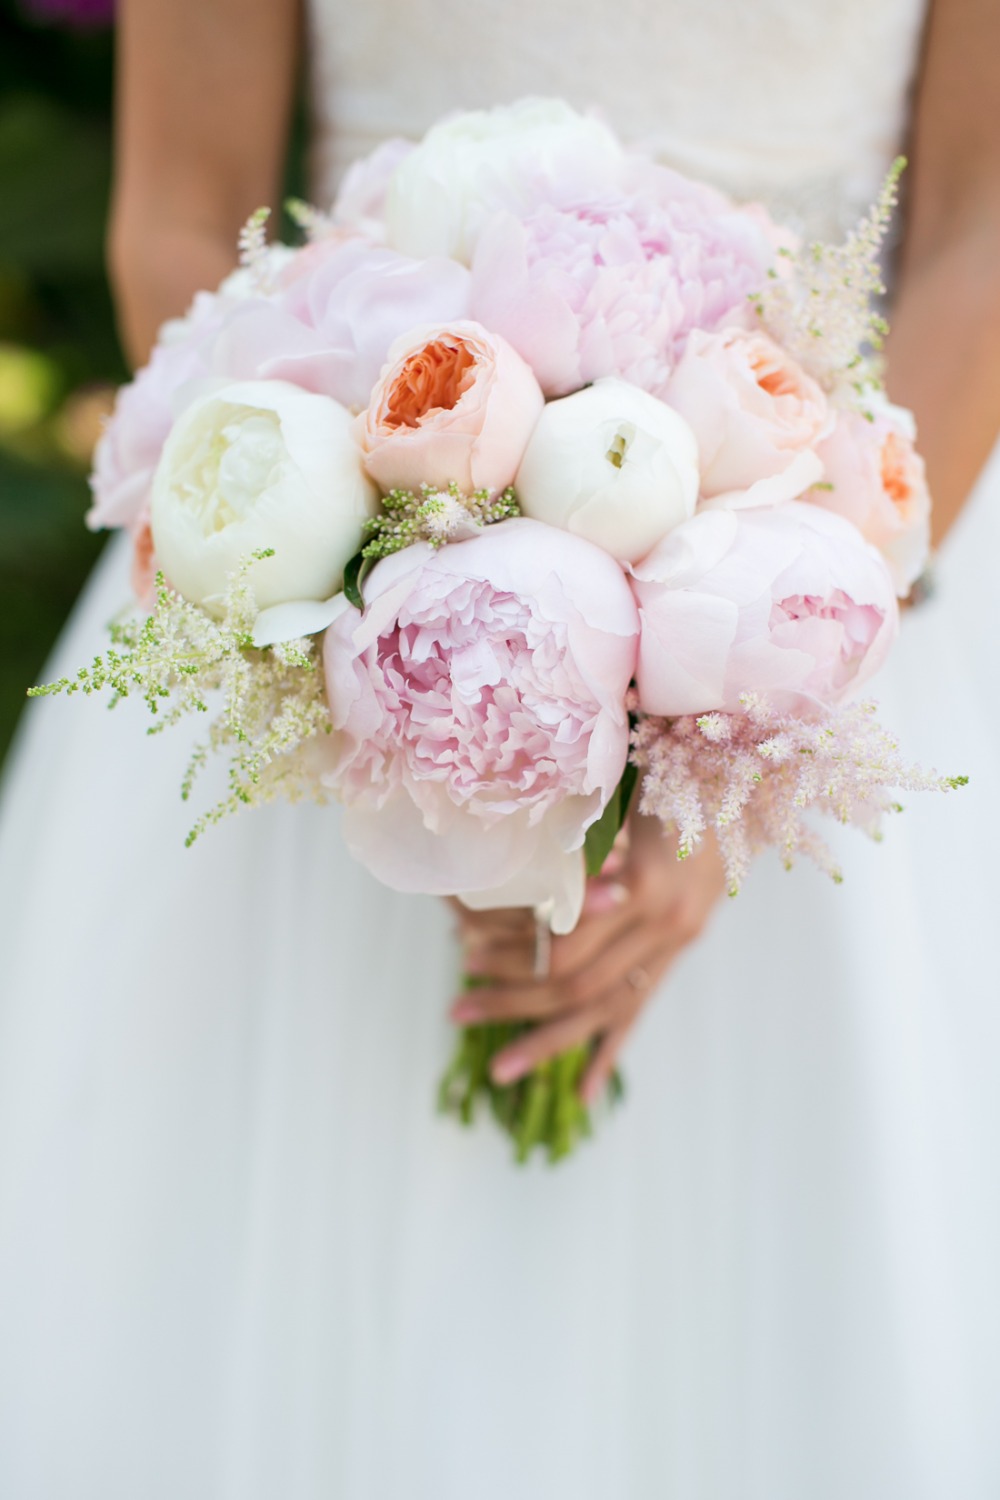 Blush, peach and white peony bouquet